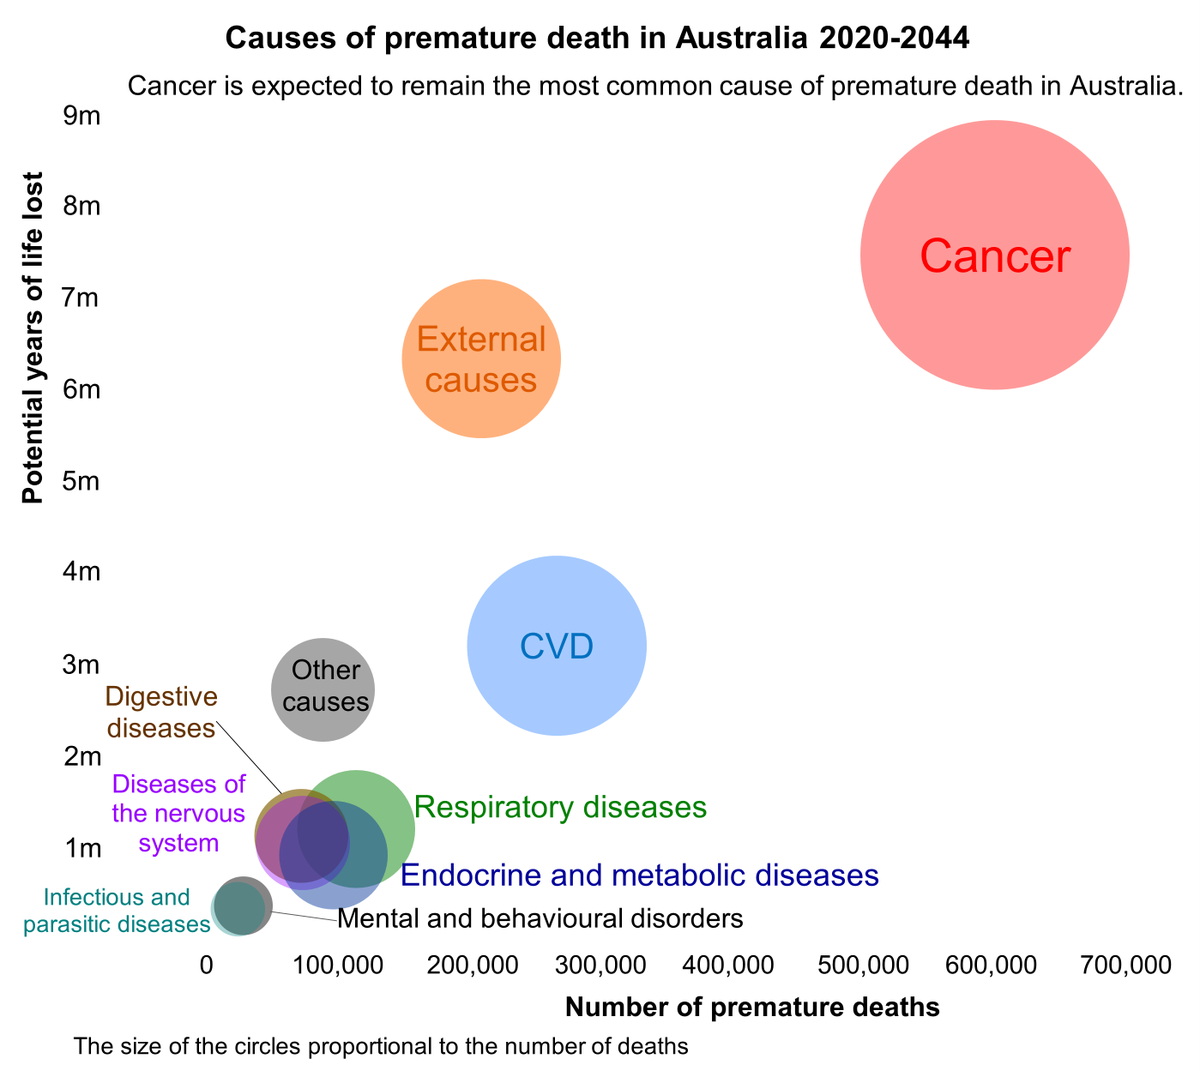 During 2020-2044, it is predicted that 1.58 million Australians will die before the age of 75, accounting for a total of 24.5 million potential years of life lost thelancet.com/journals/lanwp… #mortality #projections #cancer @DaffodilCentre @Karen_Canfell @QingweiL @SteinbergJulia